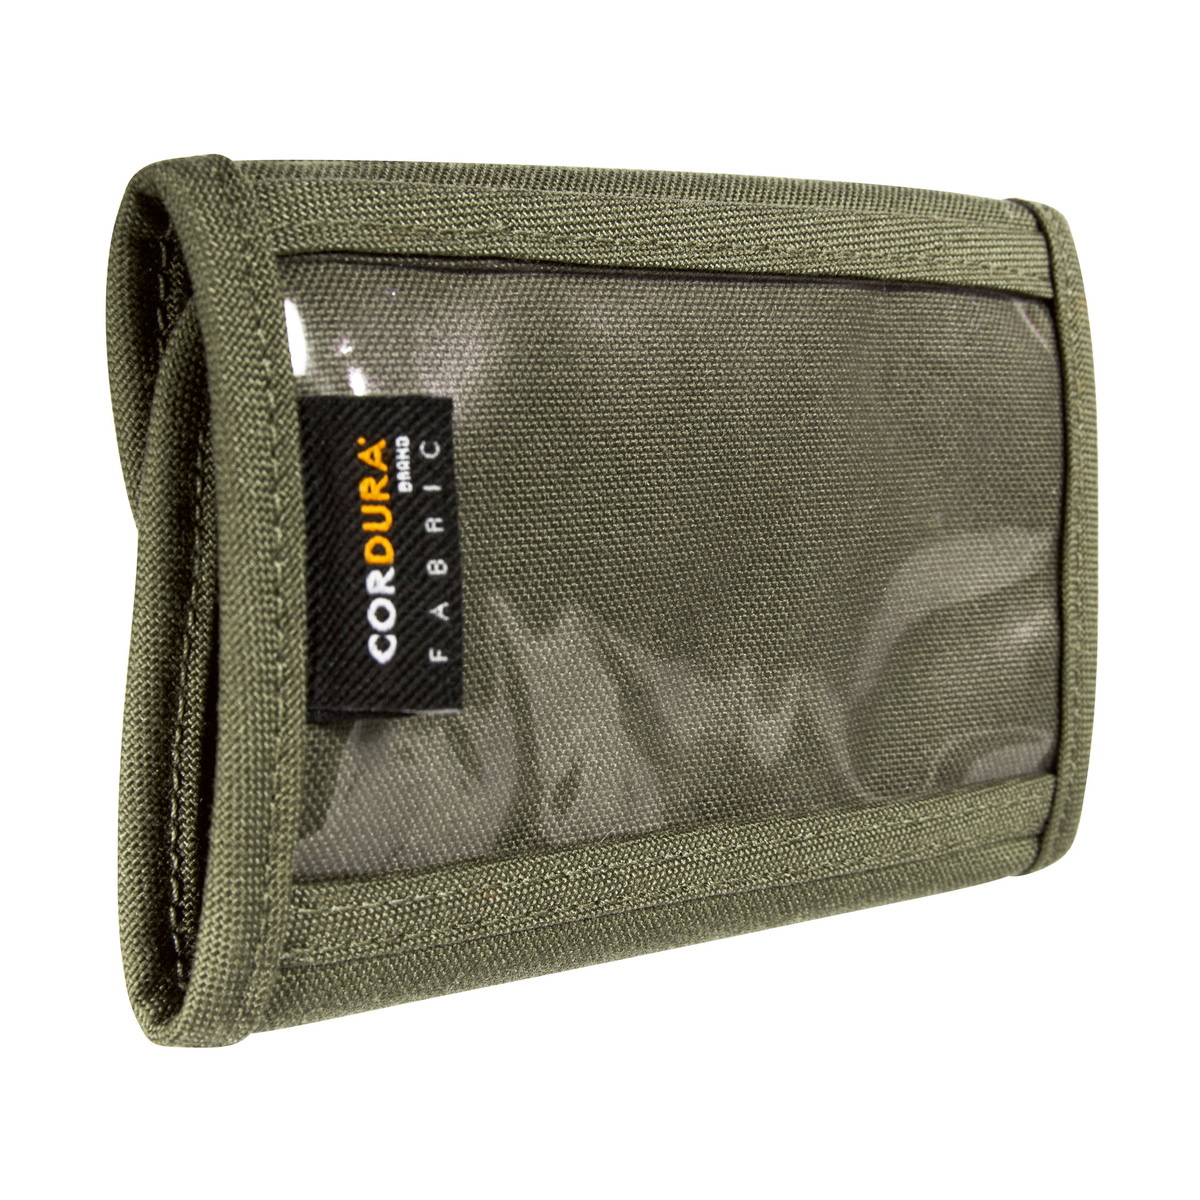 ID Wallet Olive